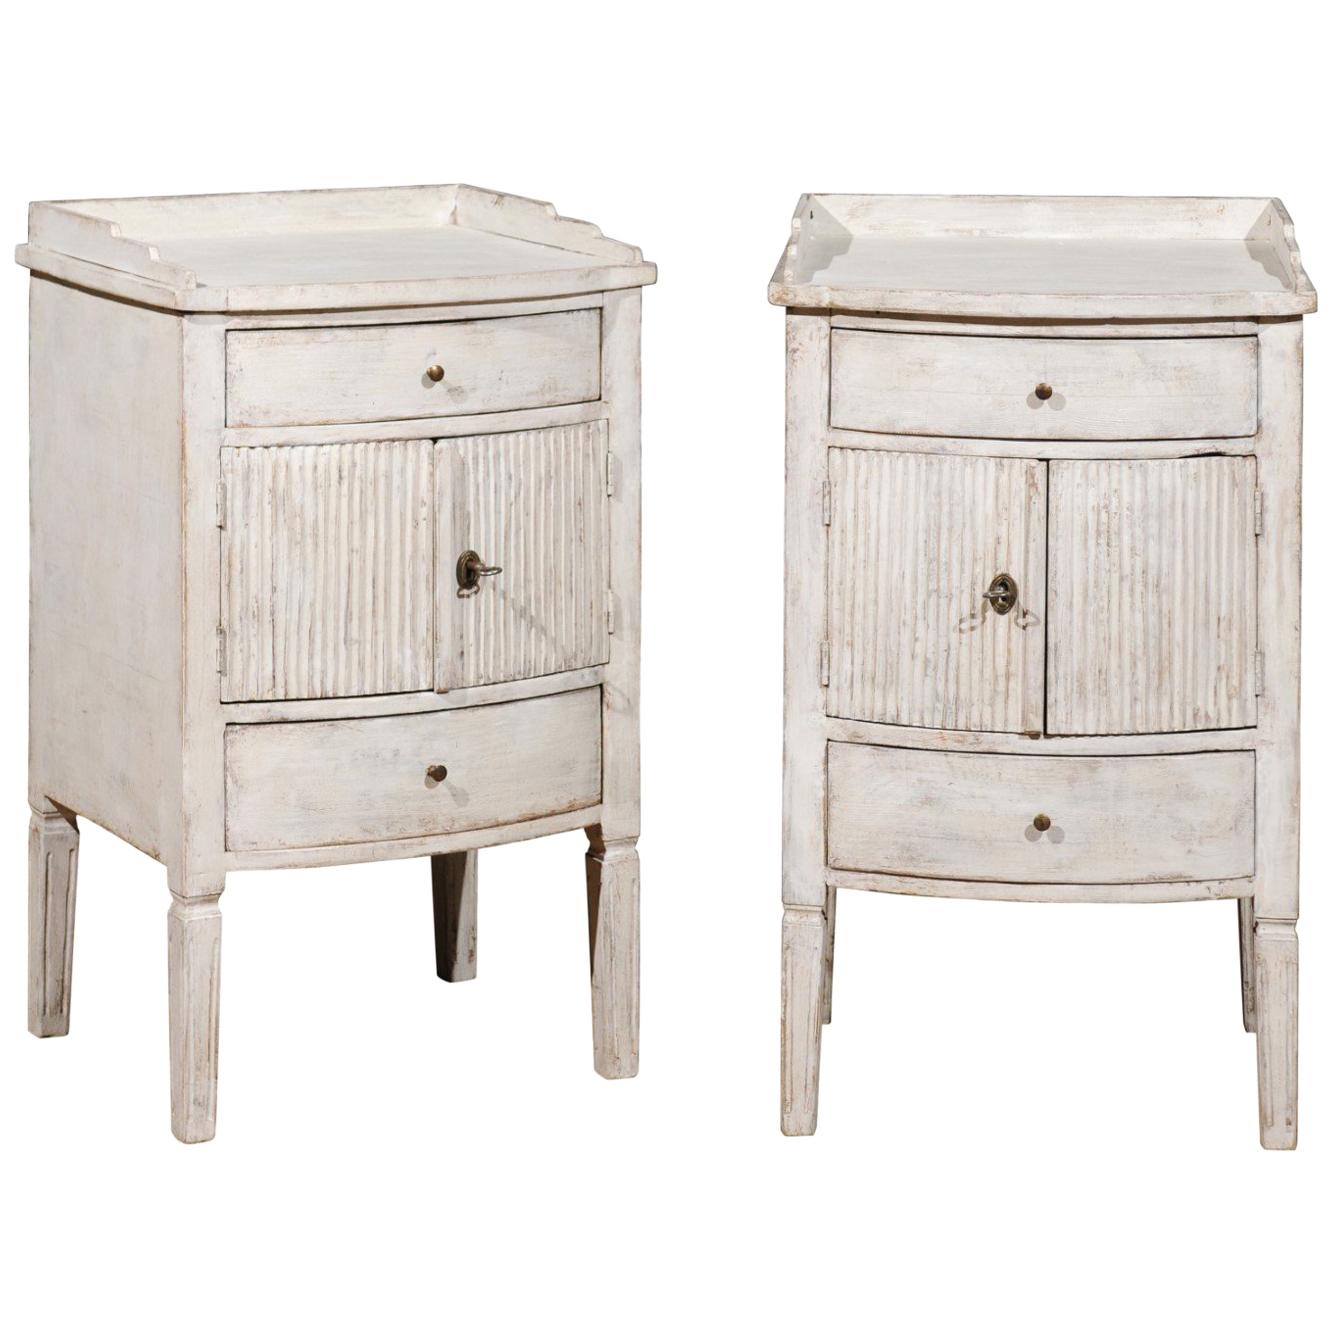 Pair of 1820 Swedish Göteborg Gustavian Painted Bedside Tables with Reeded Doors